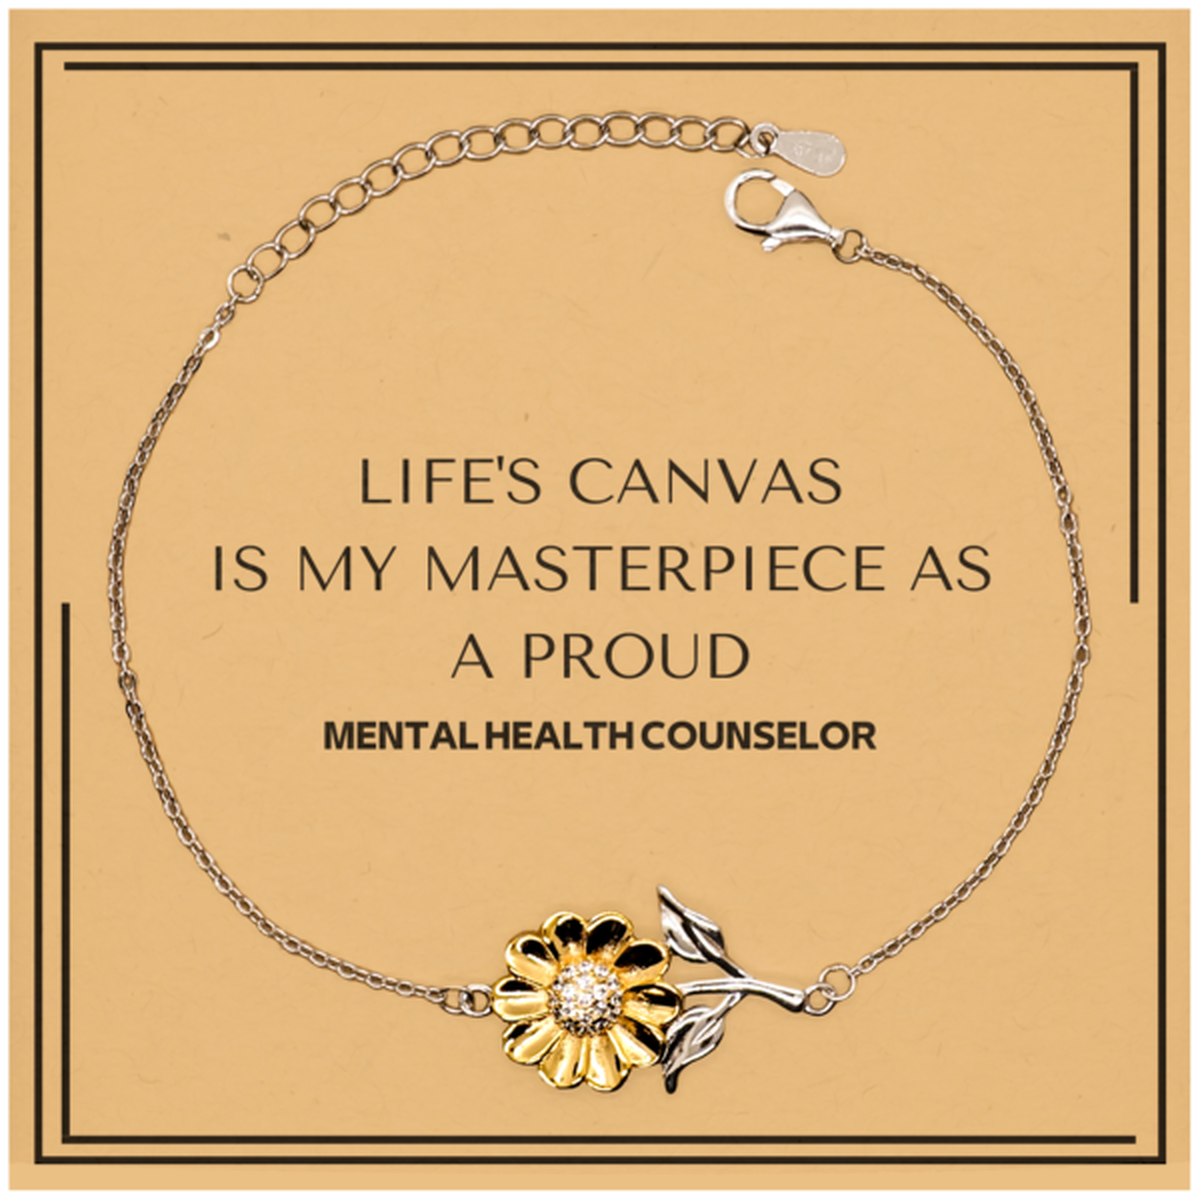 Proud Mental Health Counselor Gifts, Life's canvas is my masterpiece, Epic Birthday Christmas Unique Sunflower Bracelet For Mental Health Counselor, Coworkers, Men, Women, Friends